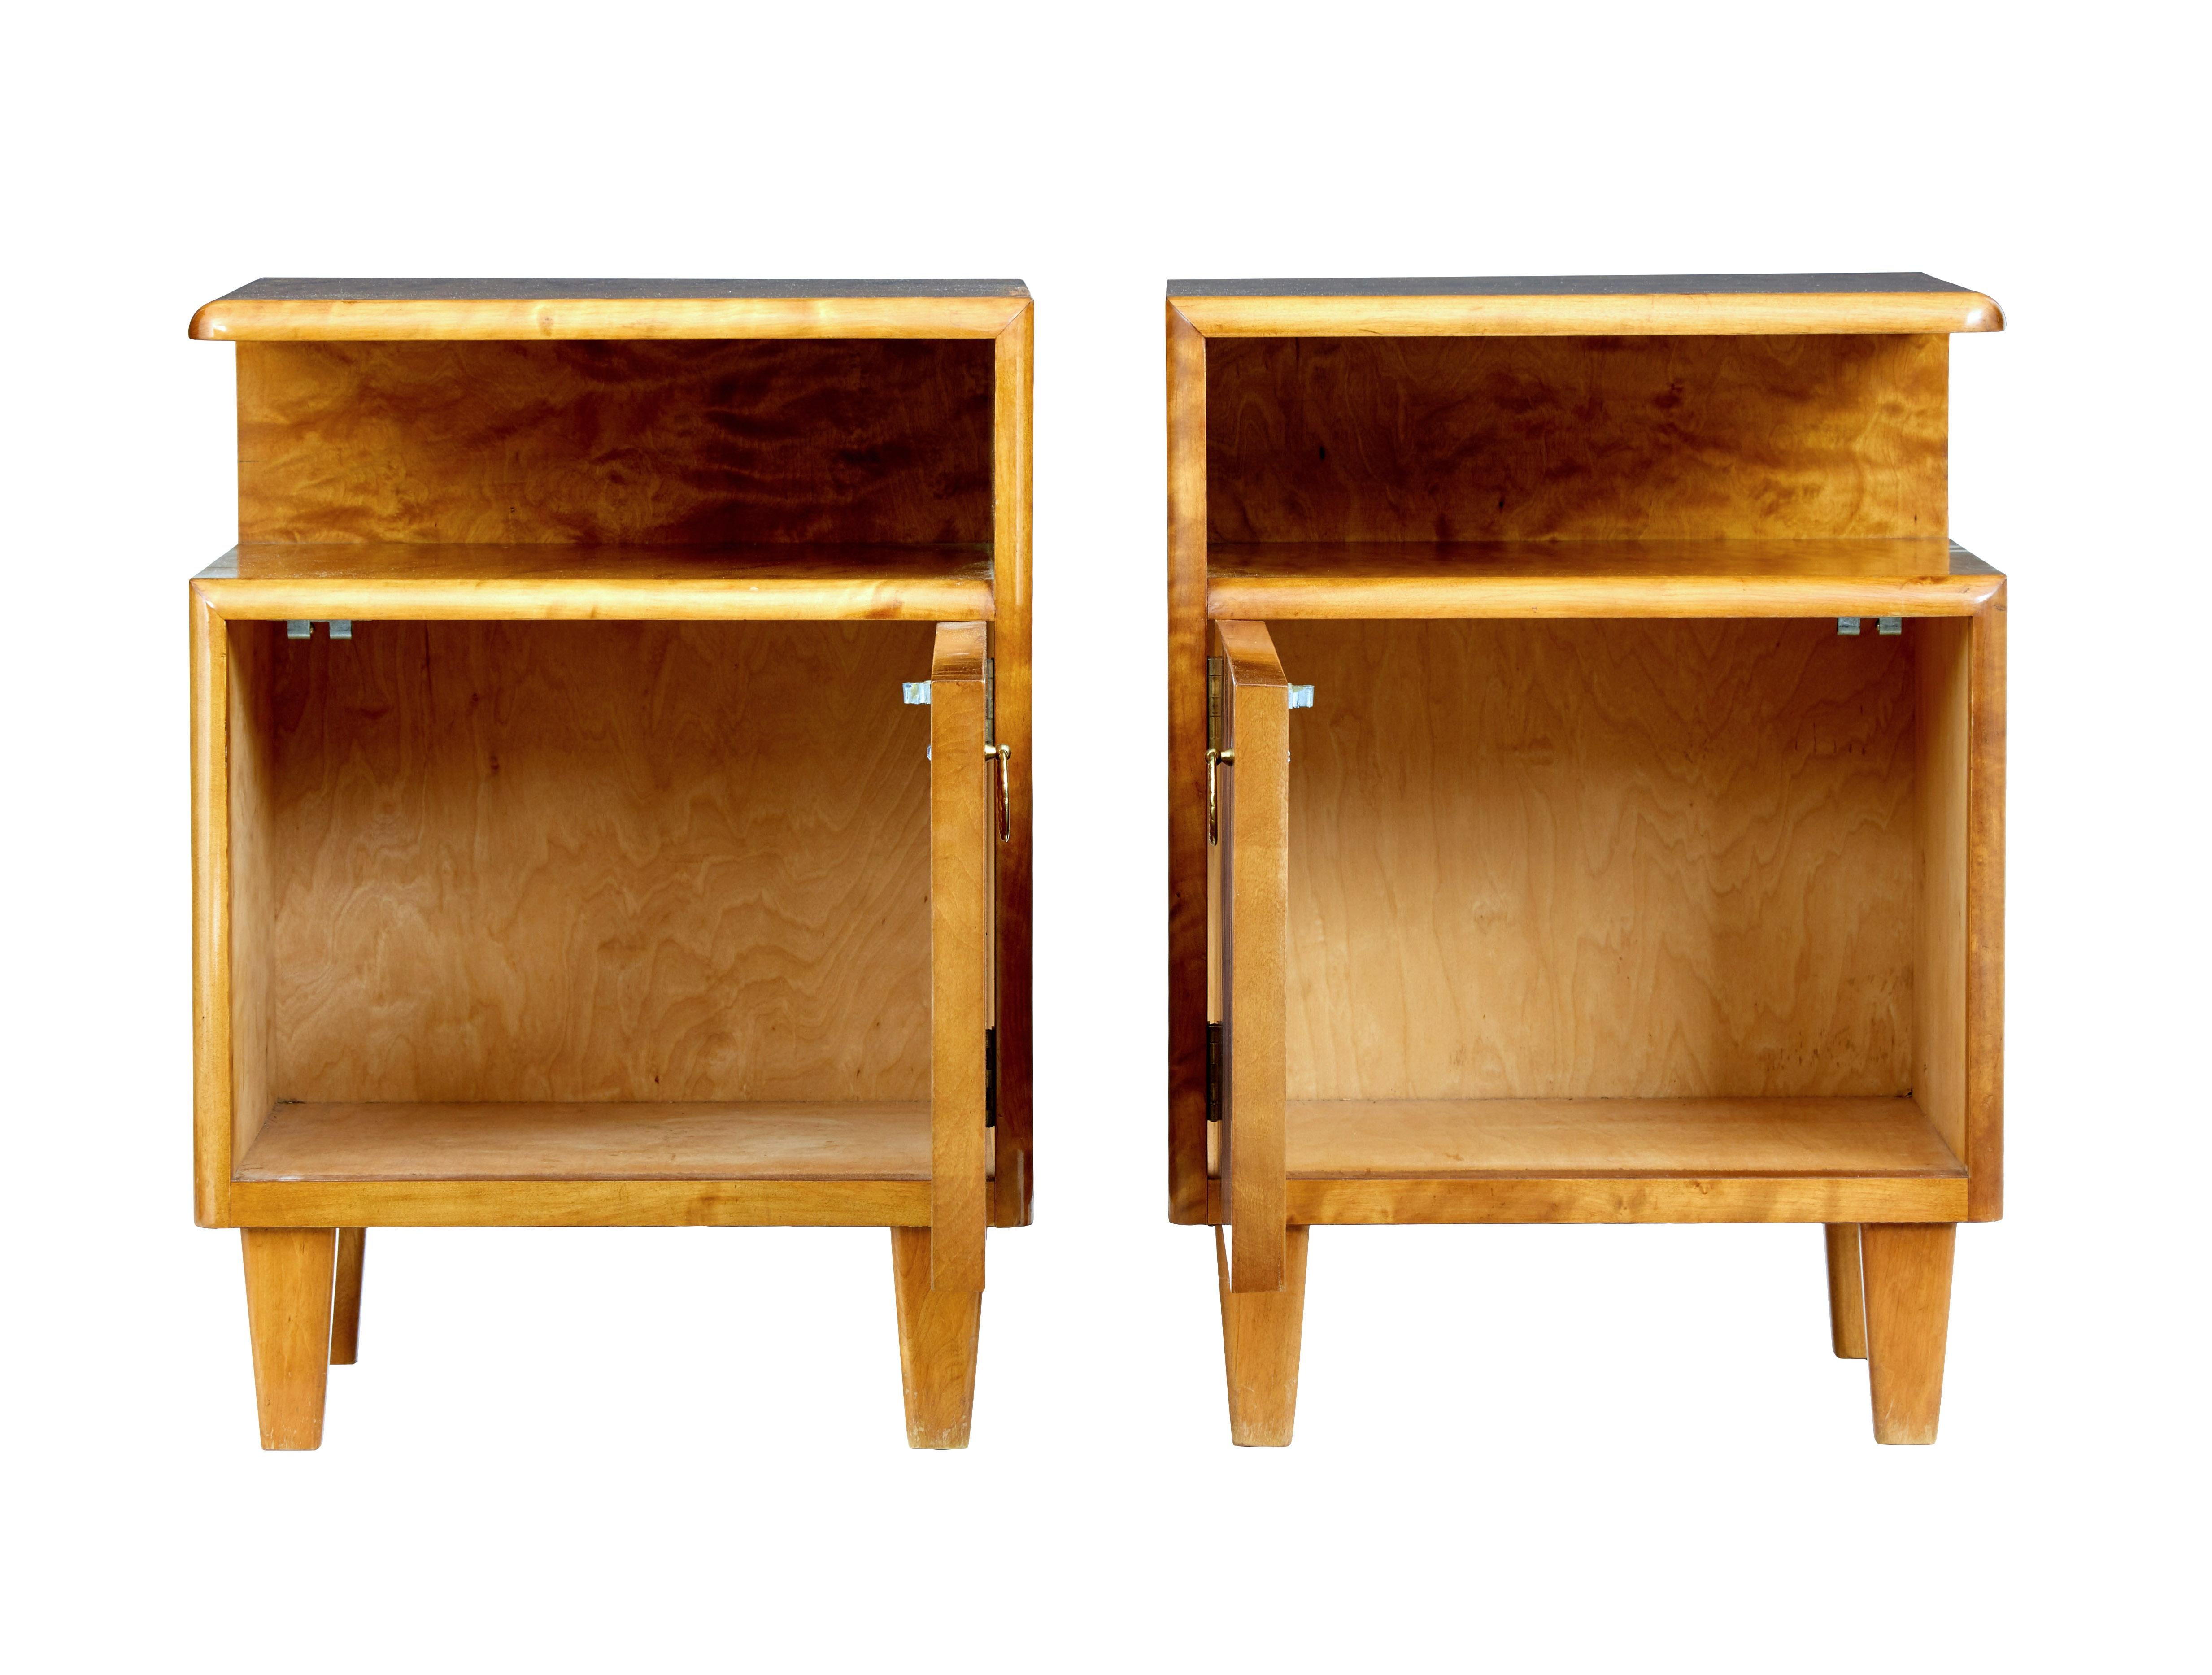 Good quality pair of Scandinavian design bedside tables, circa 1950.

Model know as 'Sonja' and produced by Mobel AB Altorp.

Floating top surface with storage space below. Single door cupboard with brass ring handle.

Some surface marks to 1